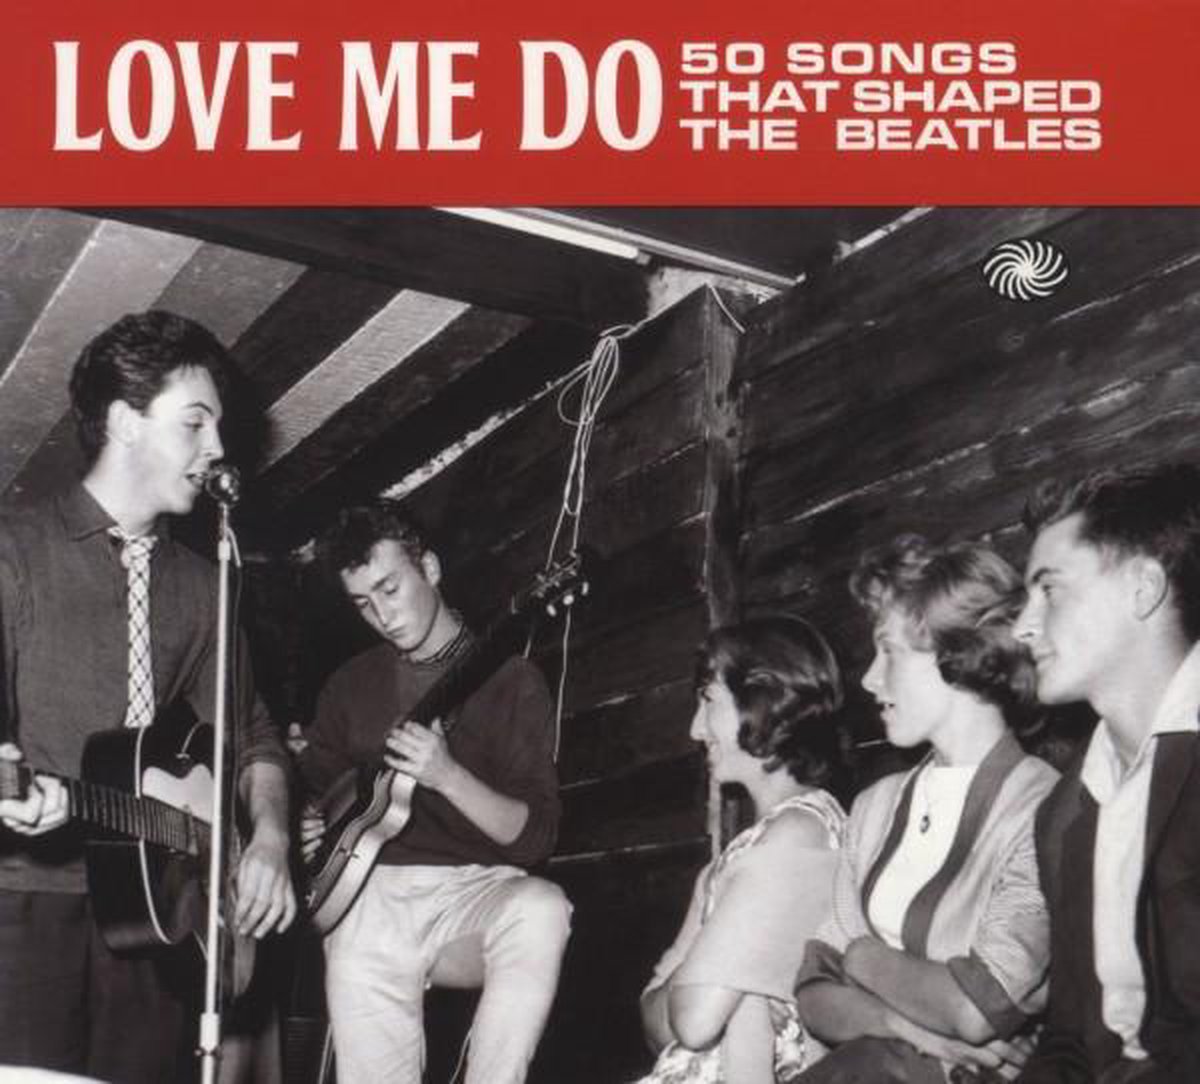 Love Me Do - 50 songs that shaped The Beatles